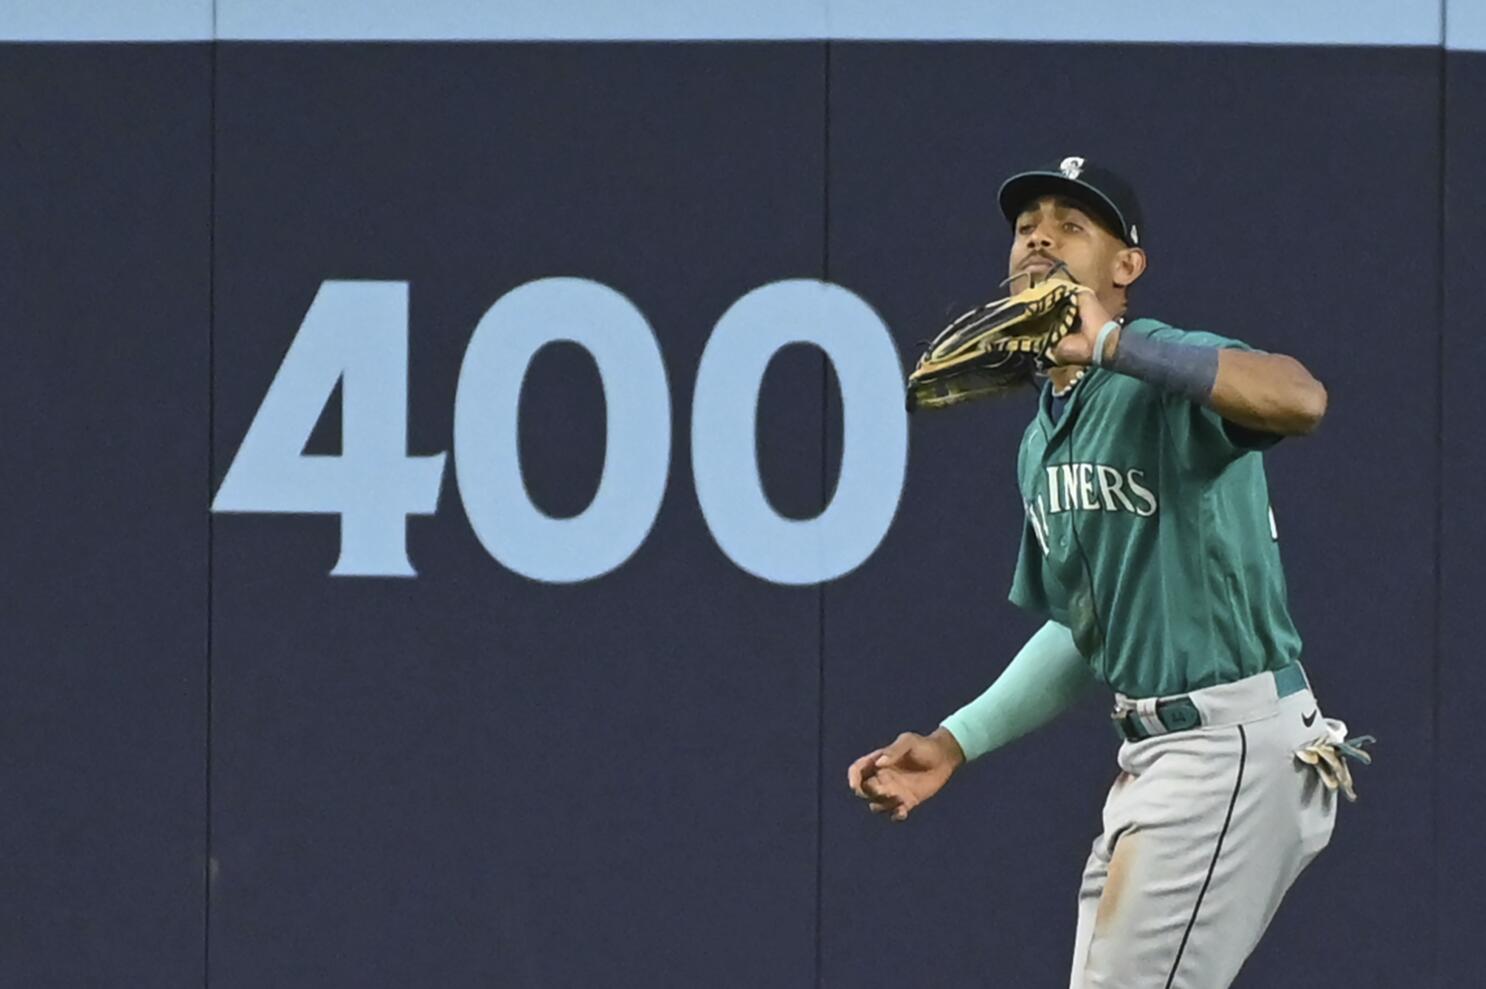 Mariners CF Julio Rodríguez exits game with sore lower back